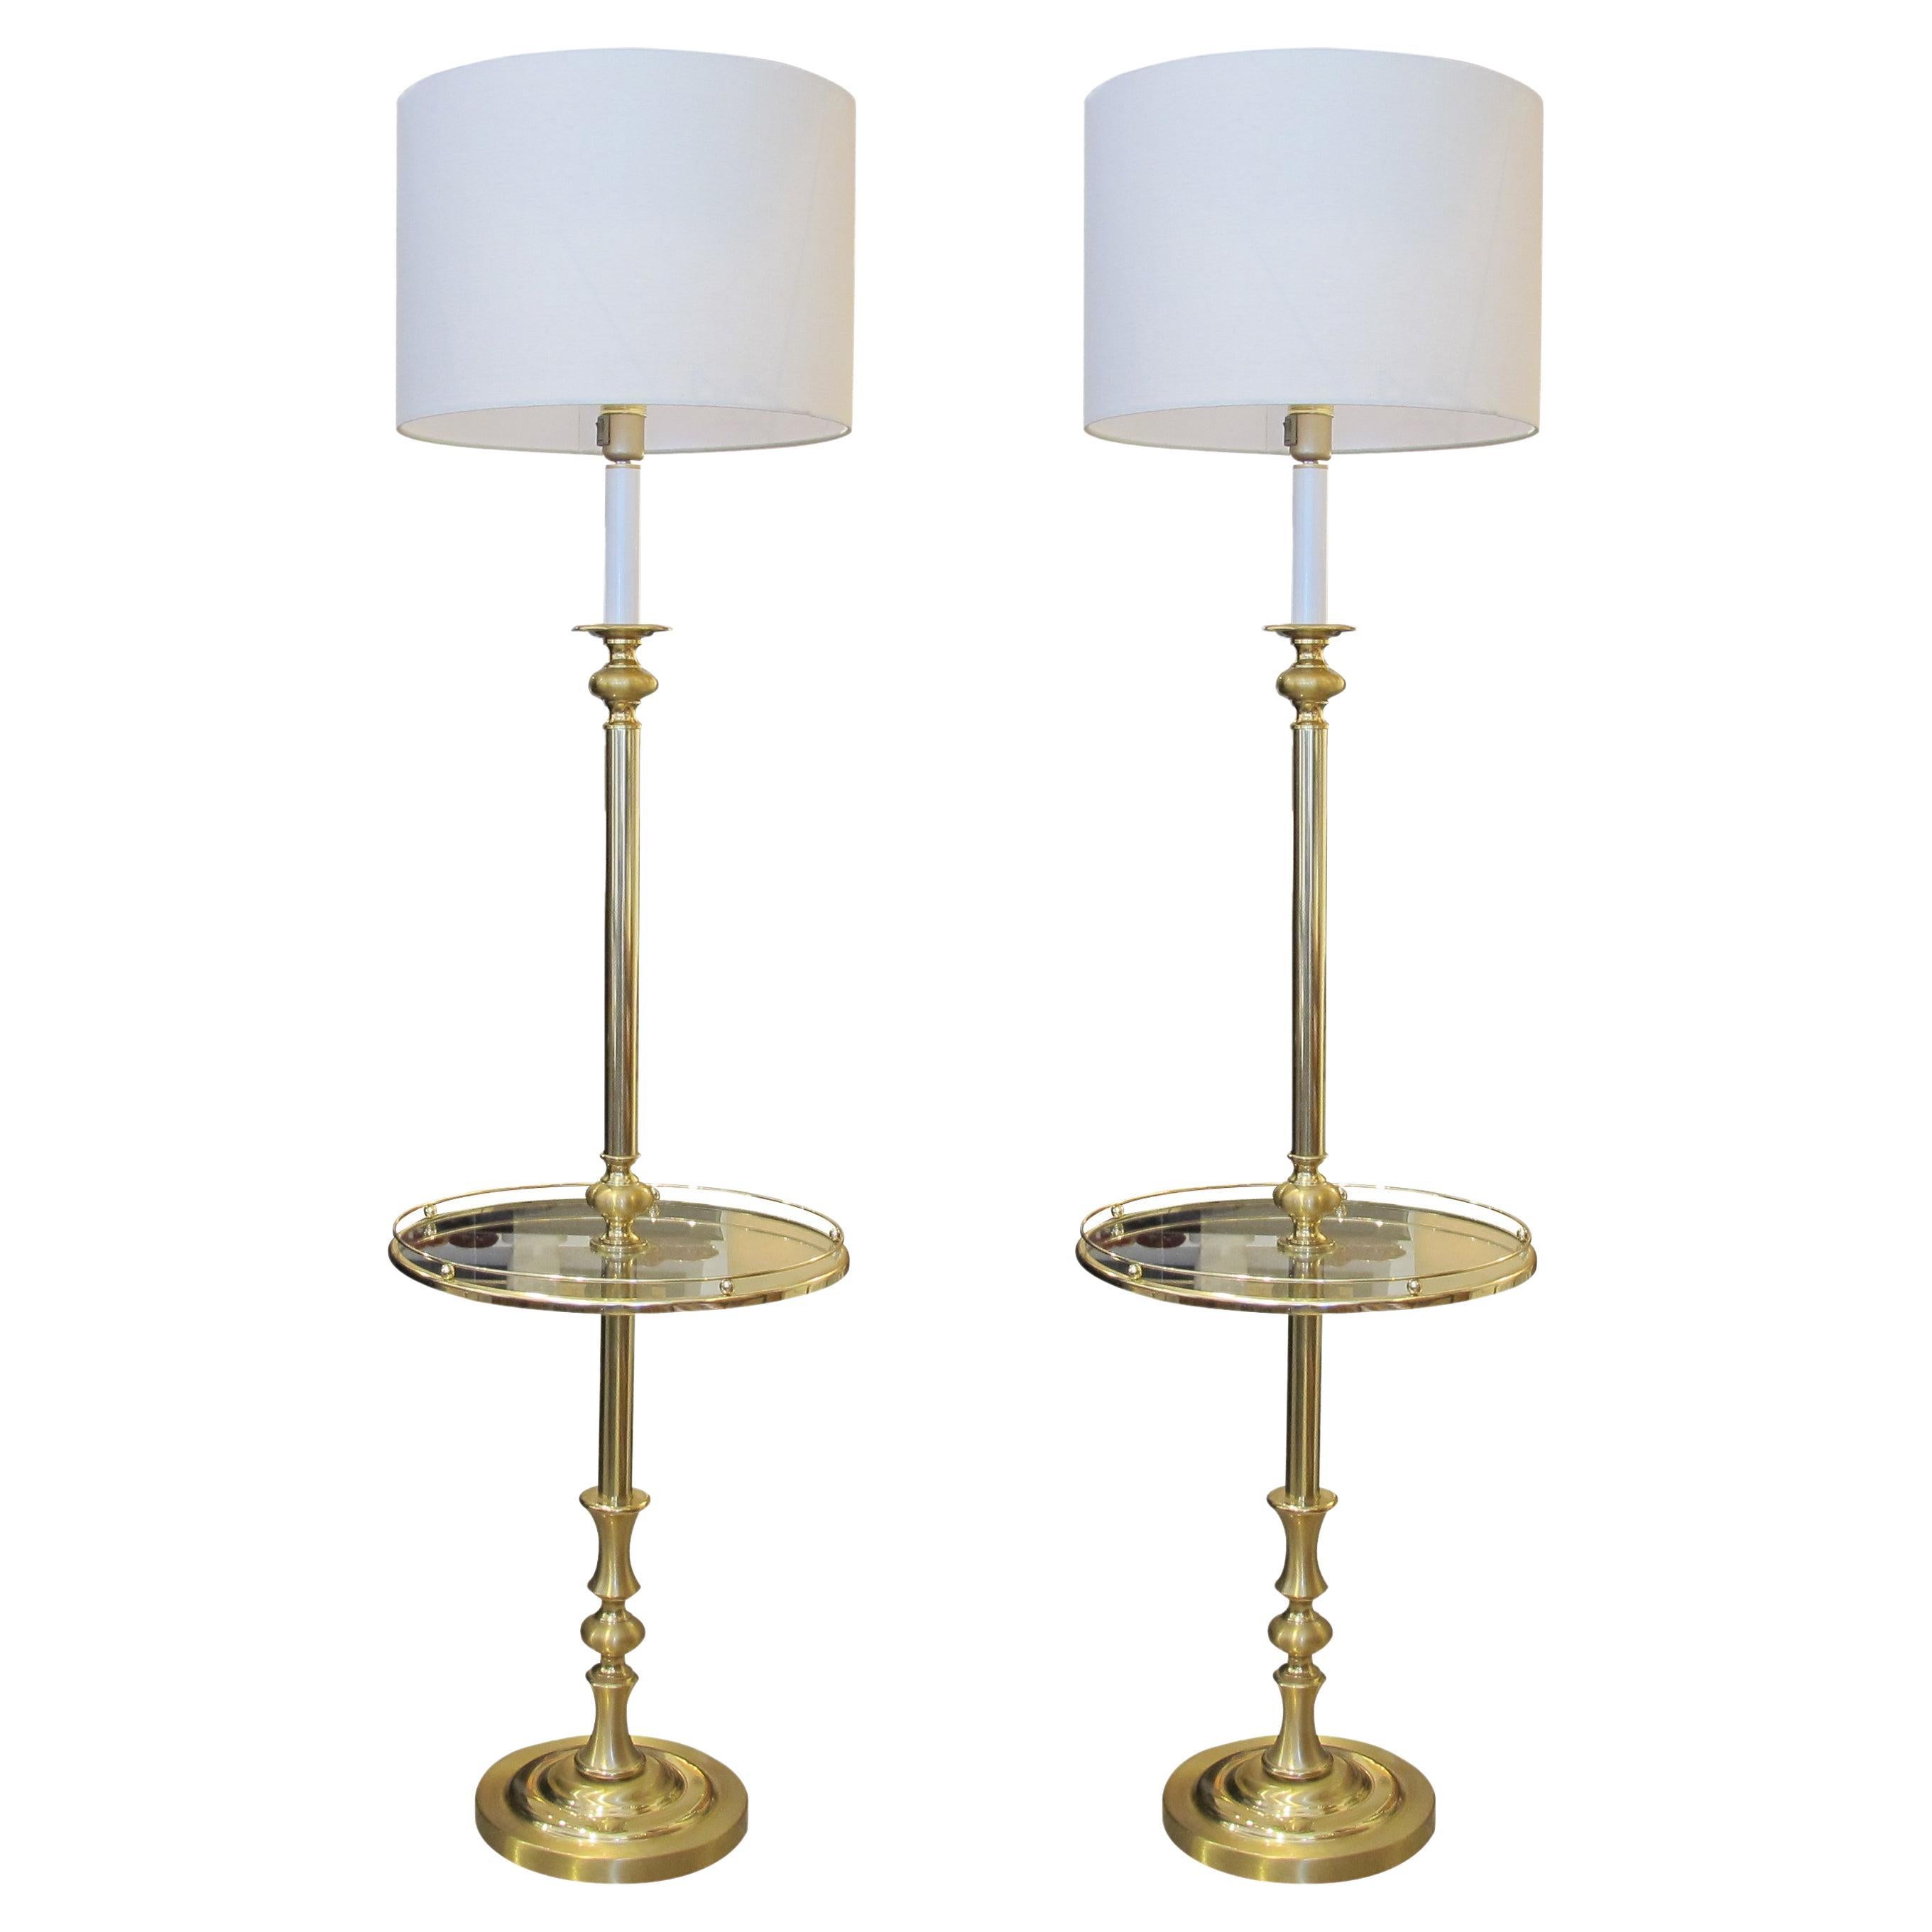 1970s Pair of Brass Floor Lamps with Integrated Side Tables, Swedish For Sale